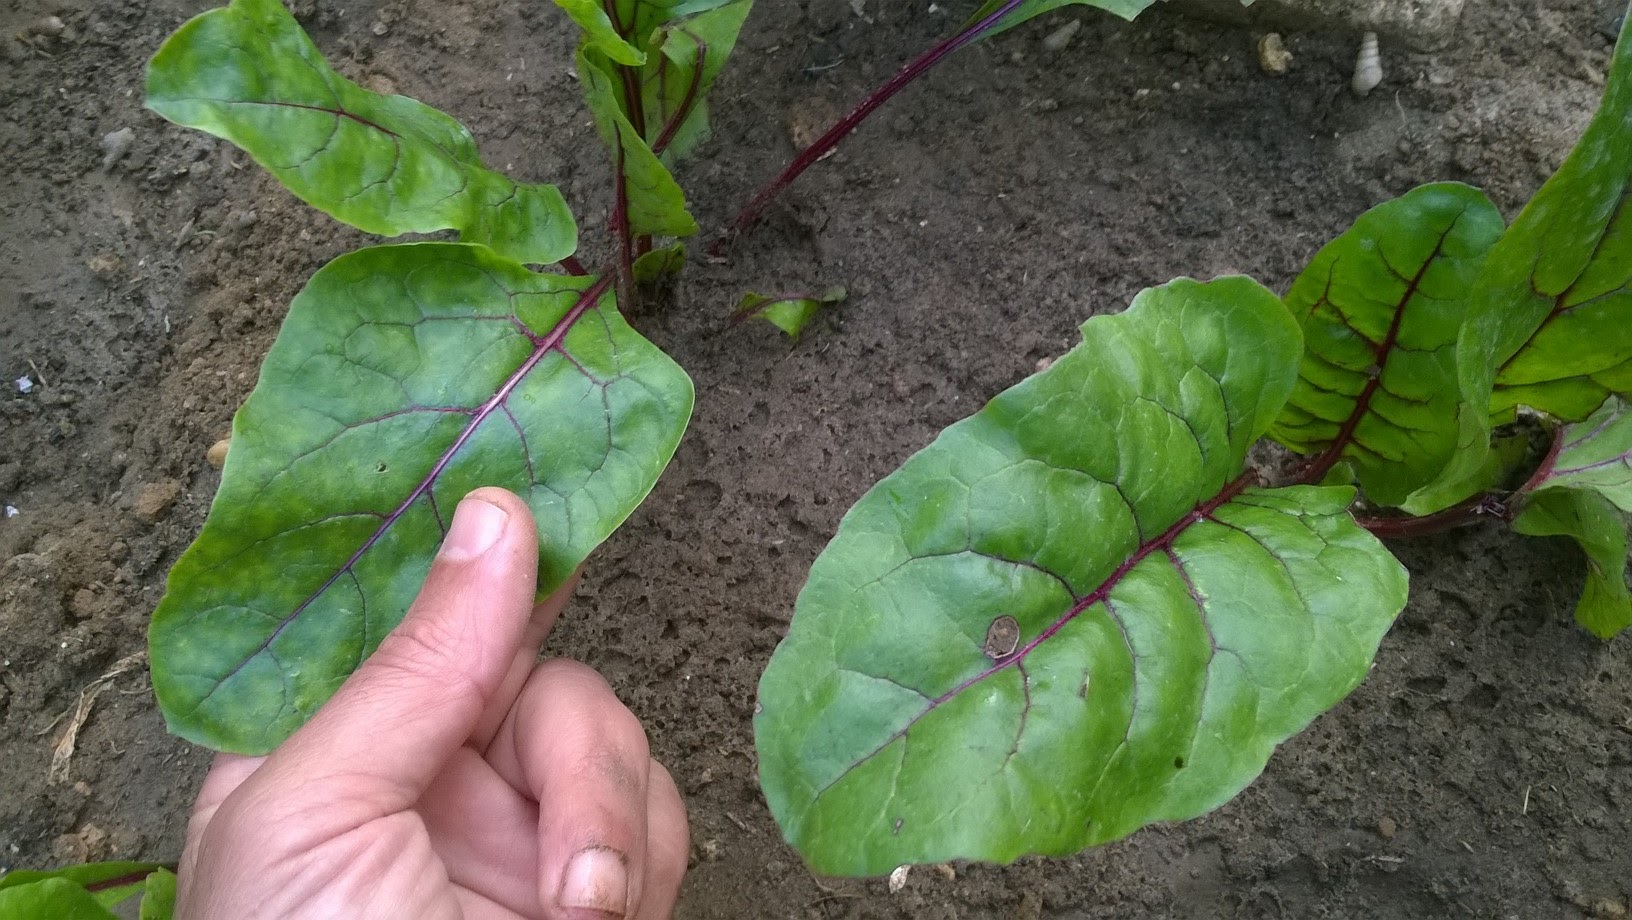 Beetroot leaves are vulnerary, antiparasitic, digestive, laxative, antifungal and contraceptive.